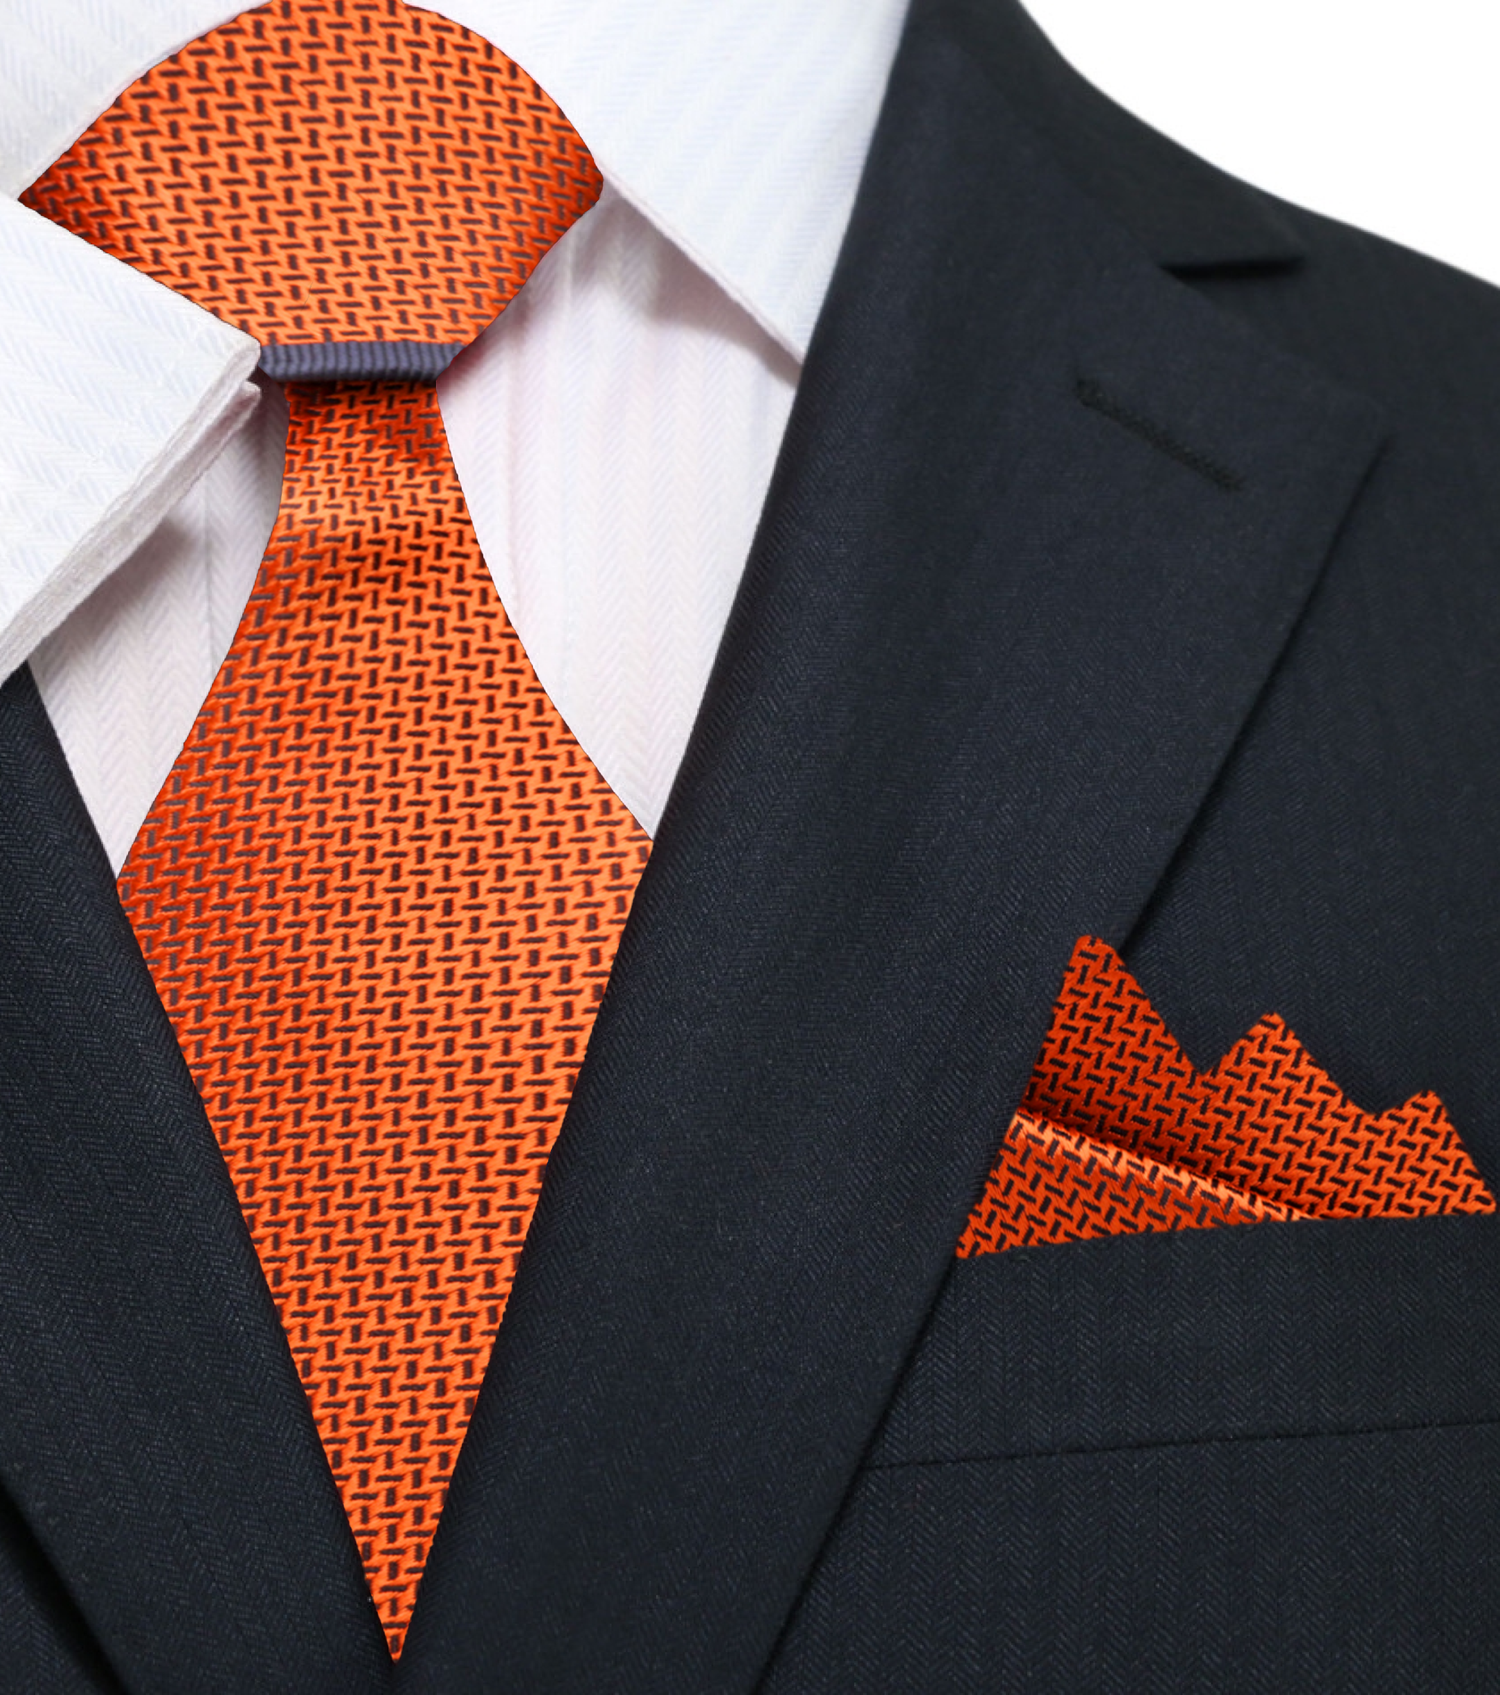 Main View: Orange with Crosshatch texture and grey border pattern silk necktie and pocket square